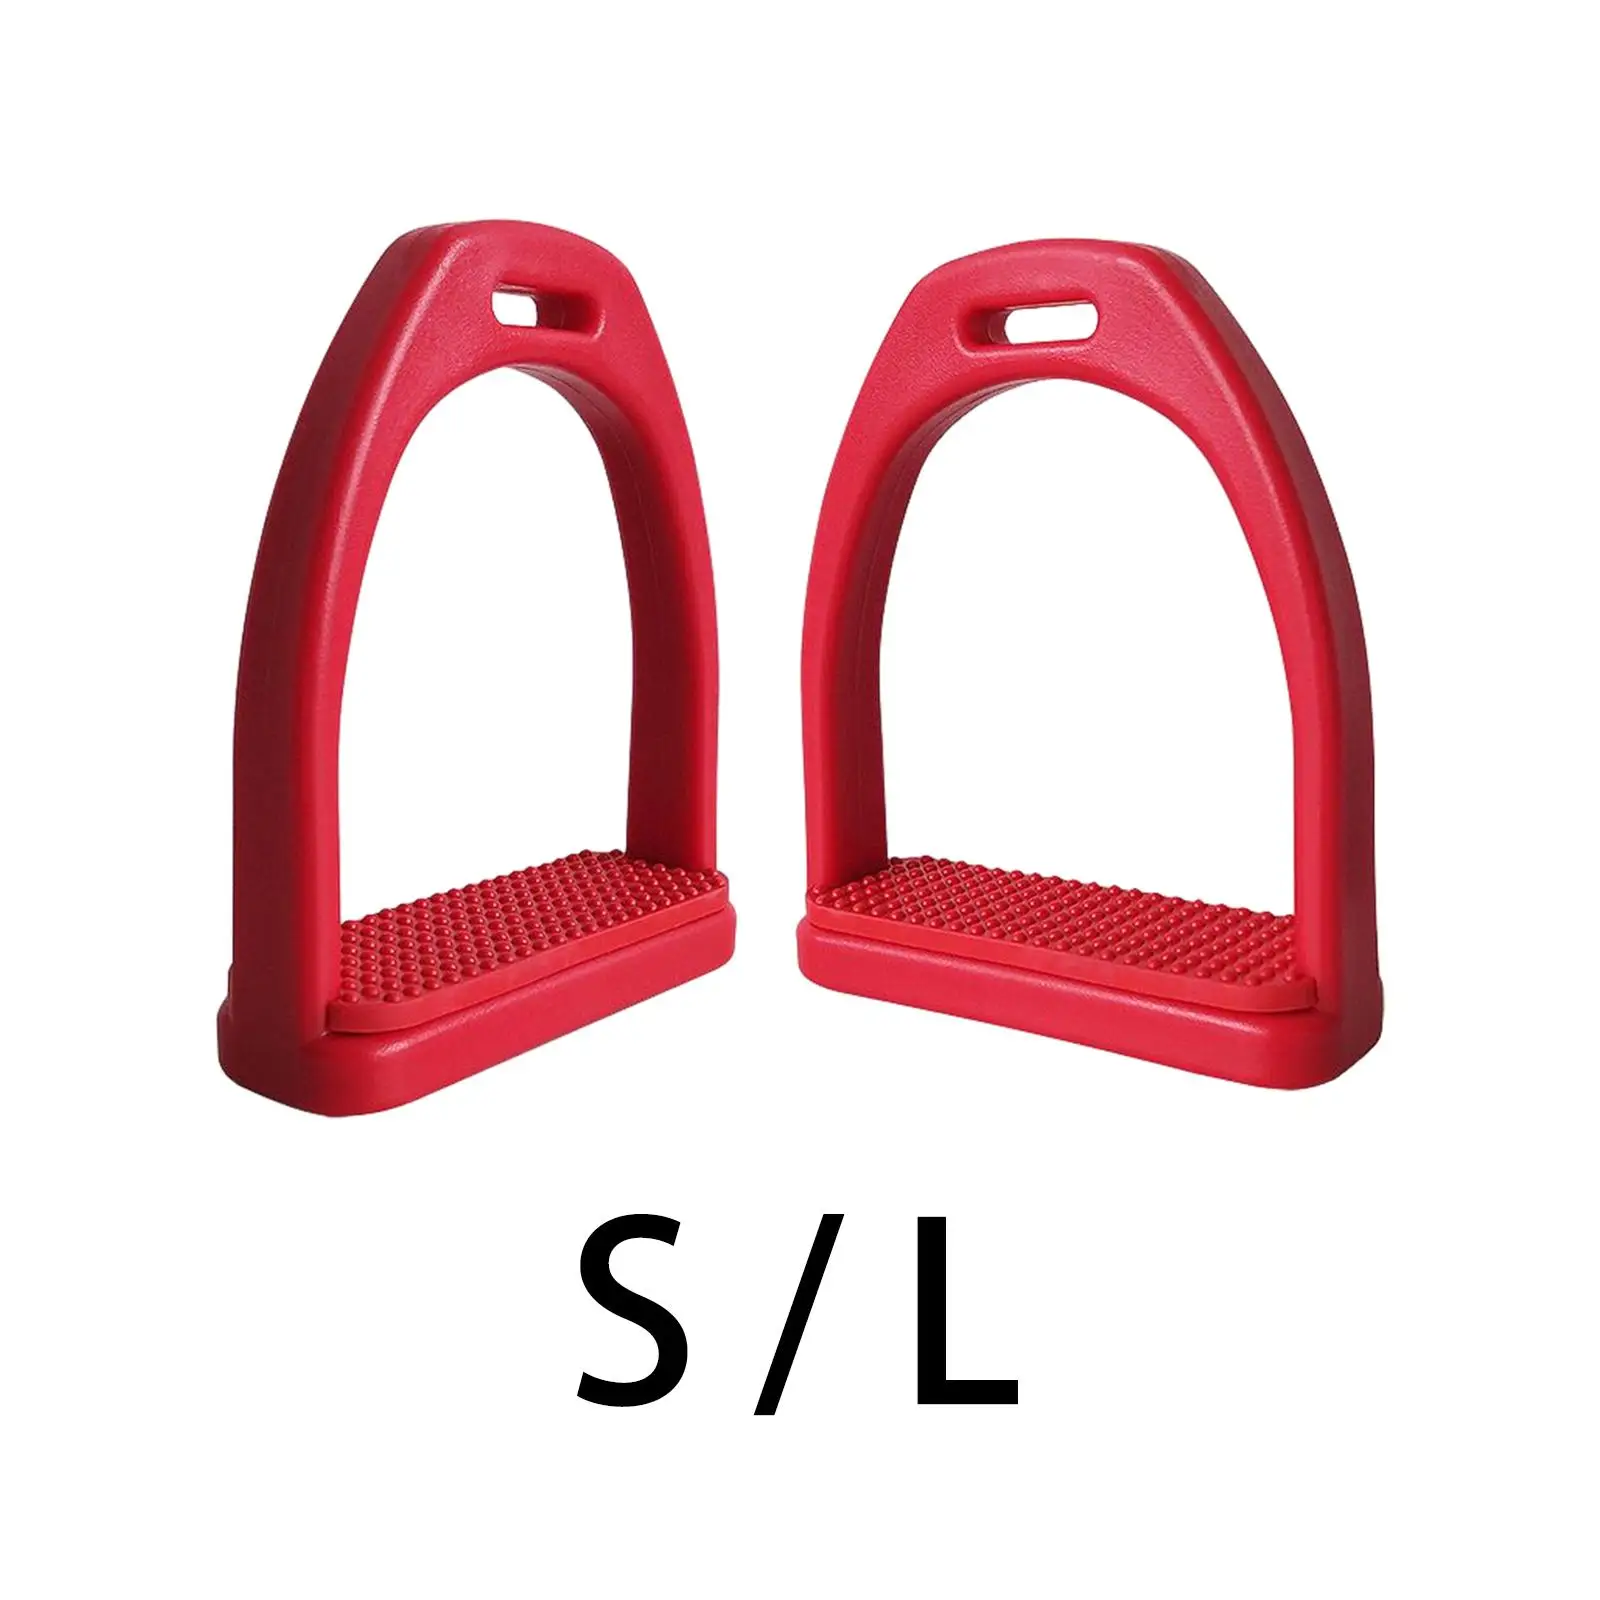 2Pcs Horse Riding Stirrups Equestrian Sports Rubber Pad Lightweight Tool for Safety Horse Riding Outdoor Supplies Adults Kids